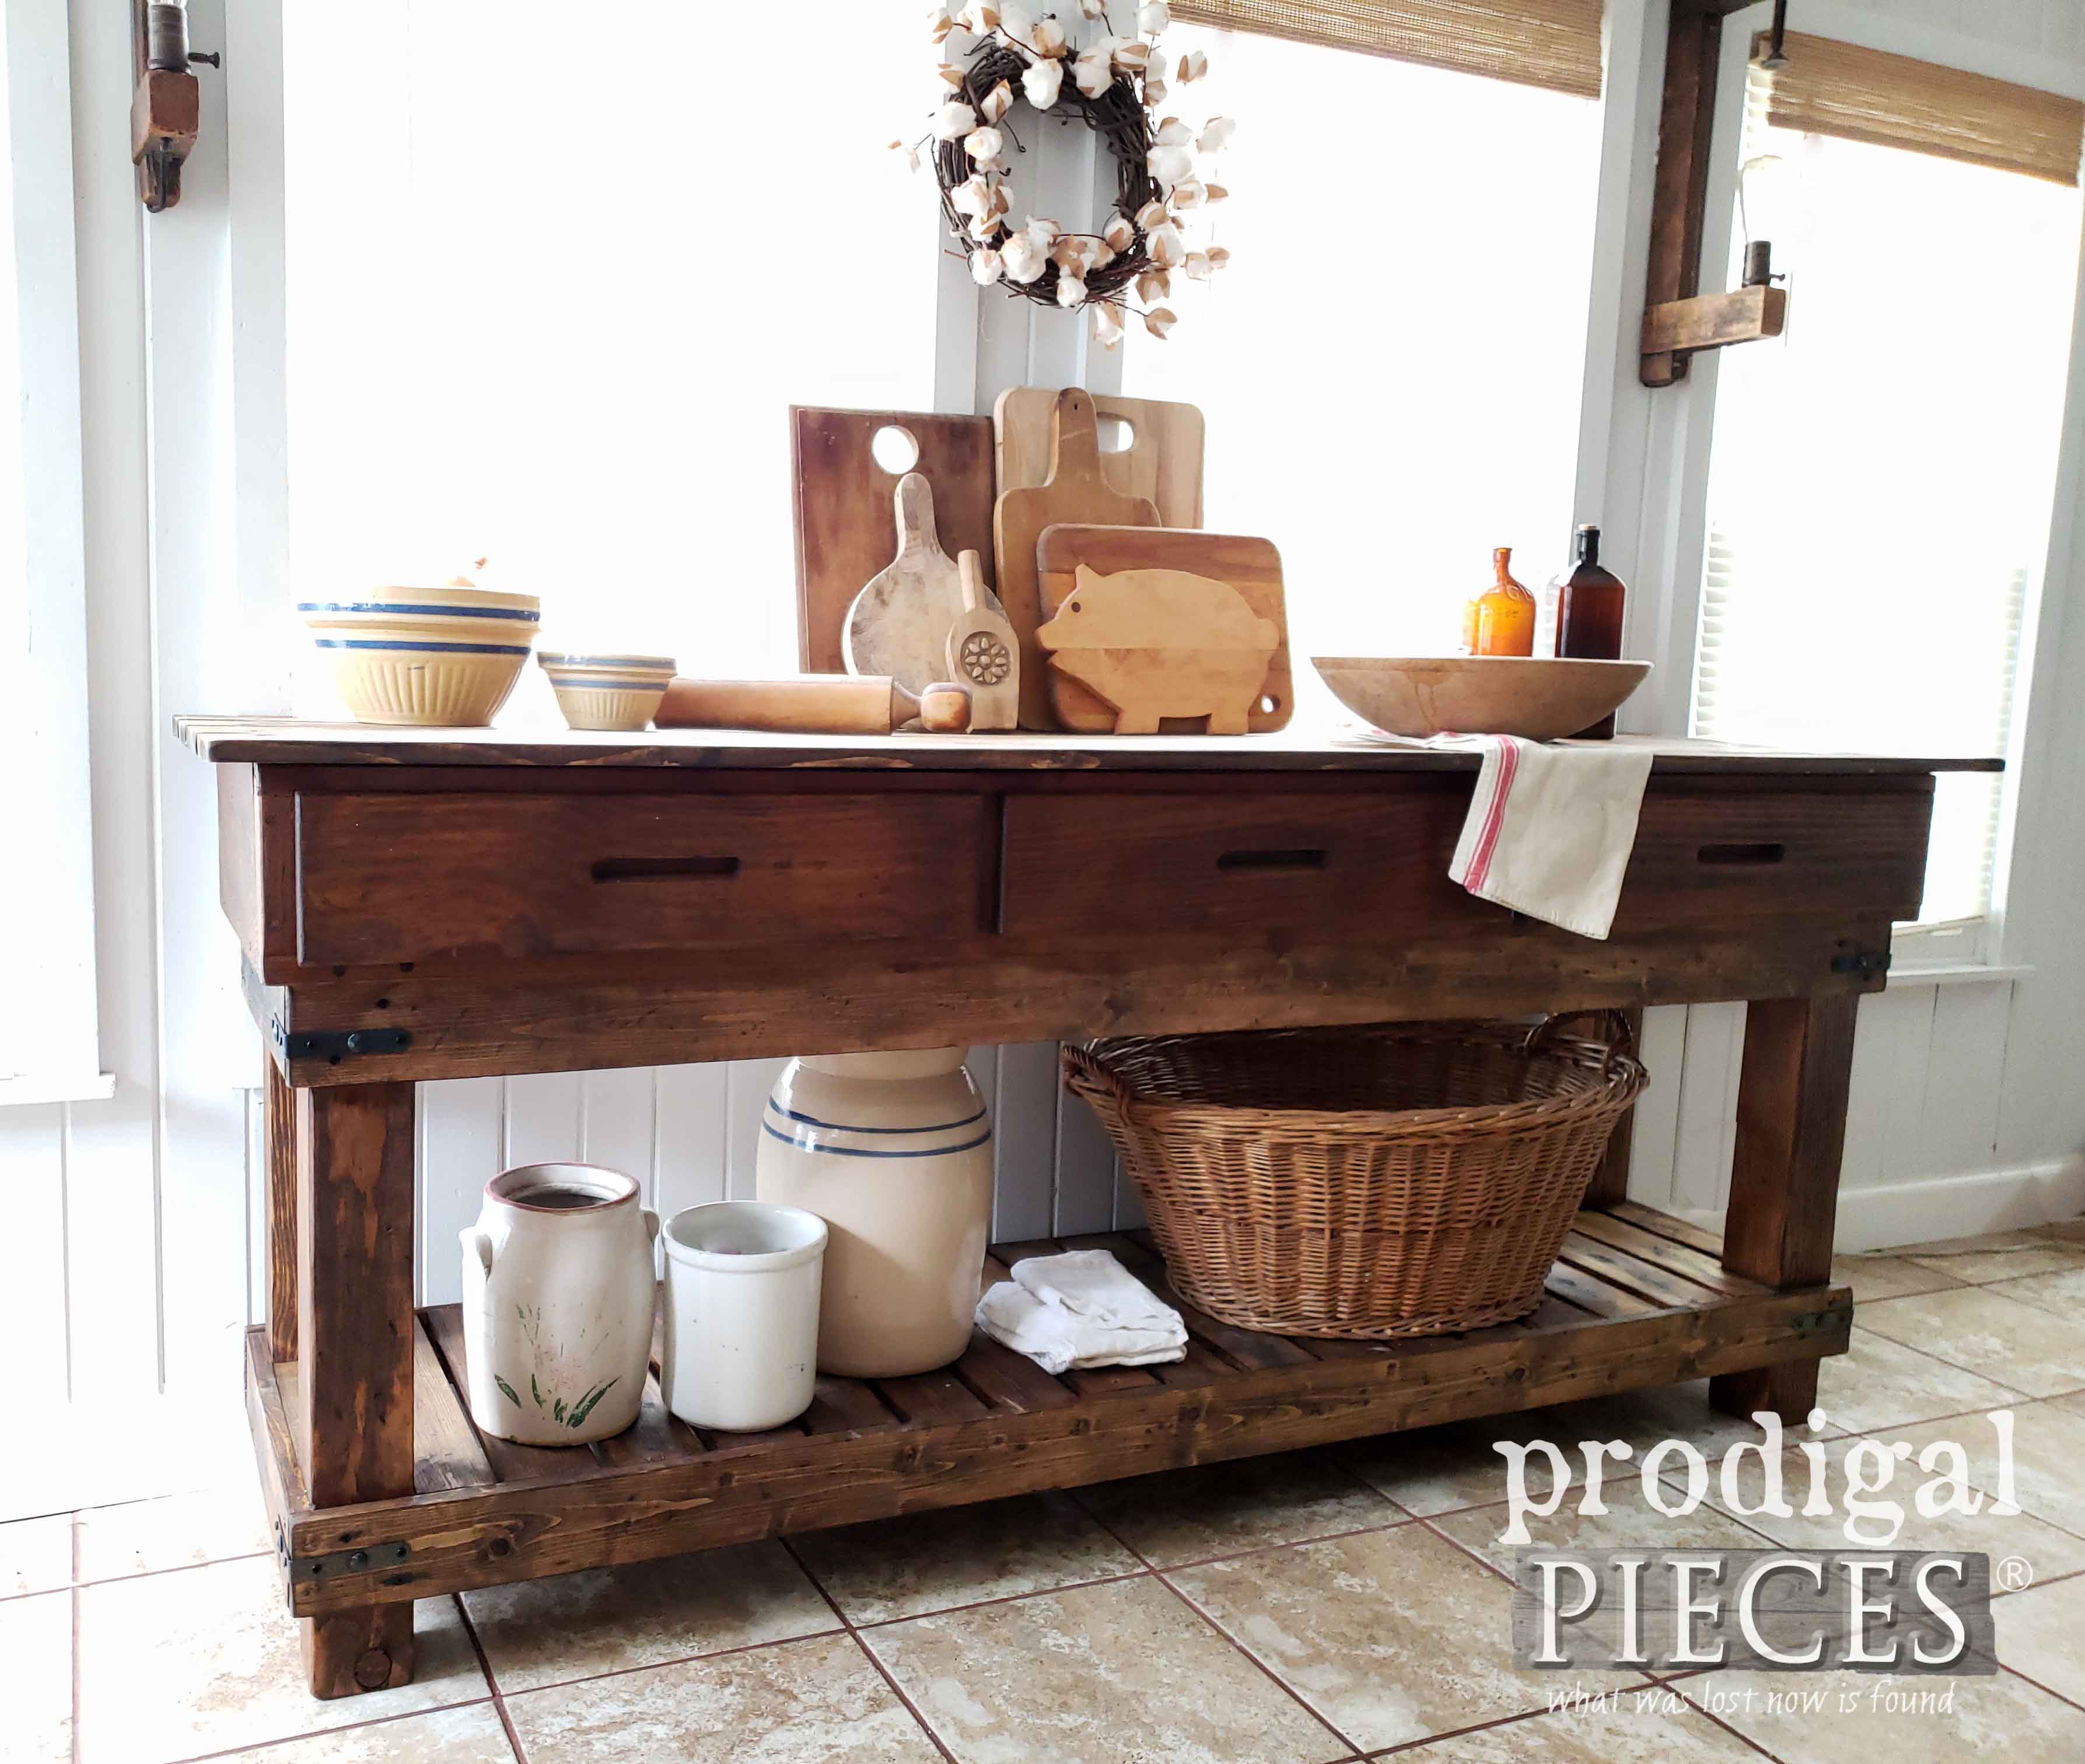 Farmhouse Style Kitchen Island Workbench or Entertainment Console by Larissa of Prodigal Pieces | prodigalpieces.com